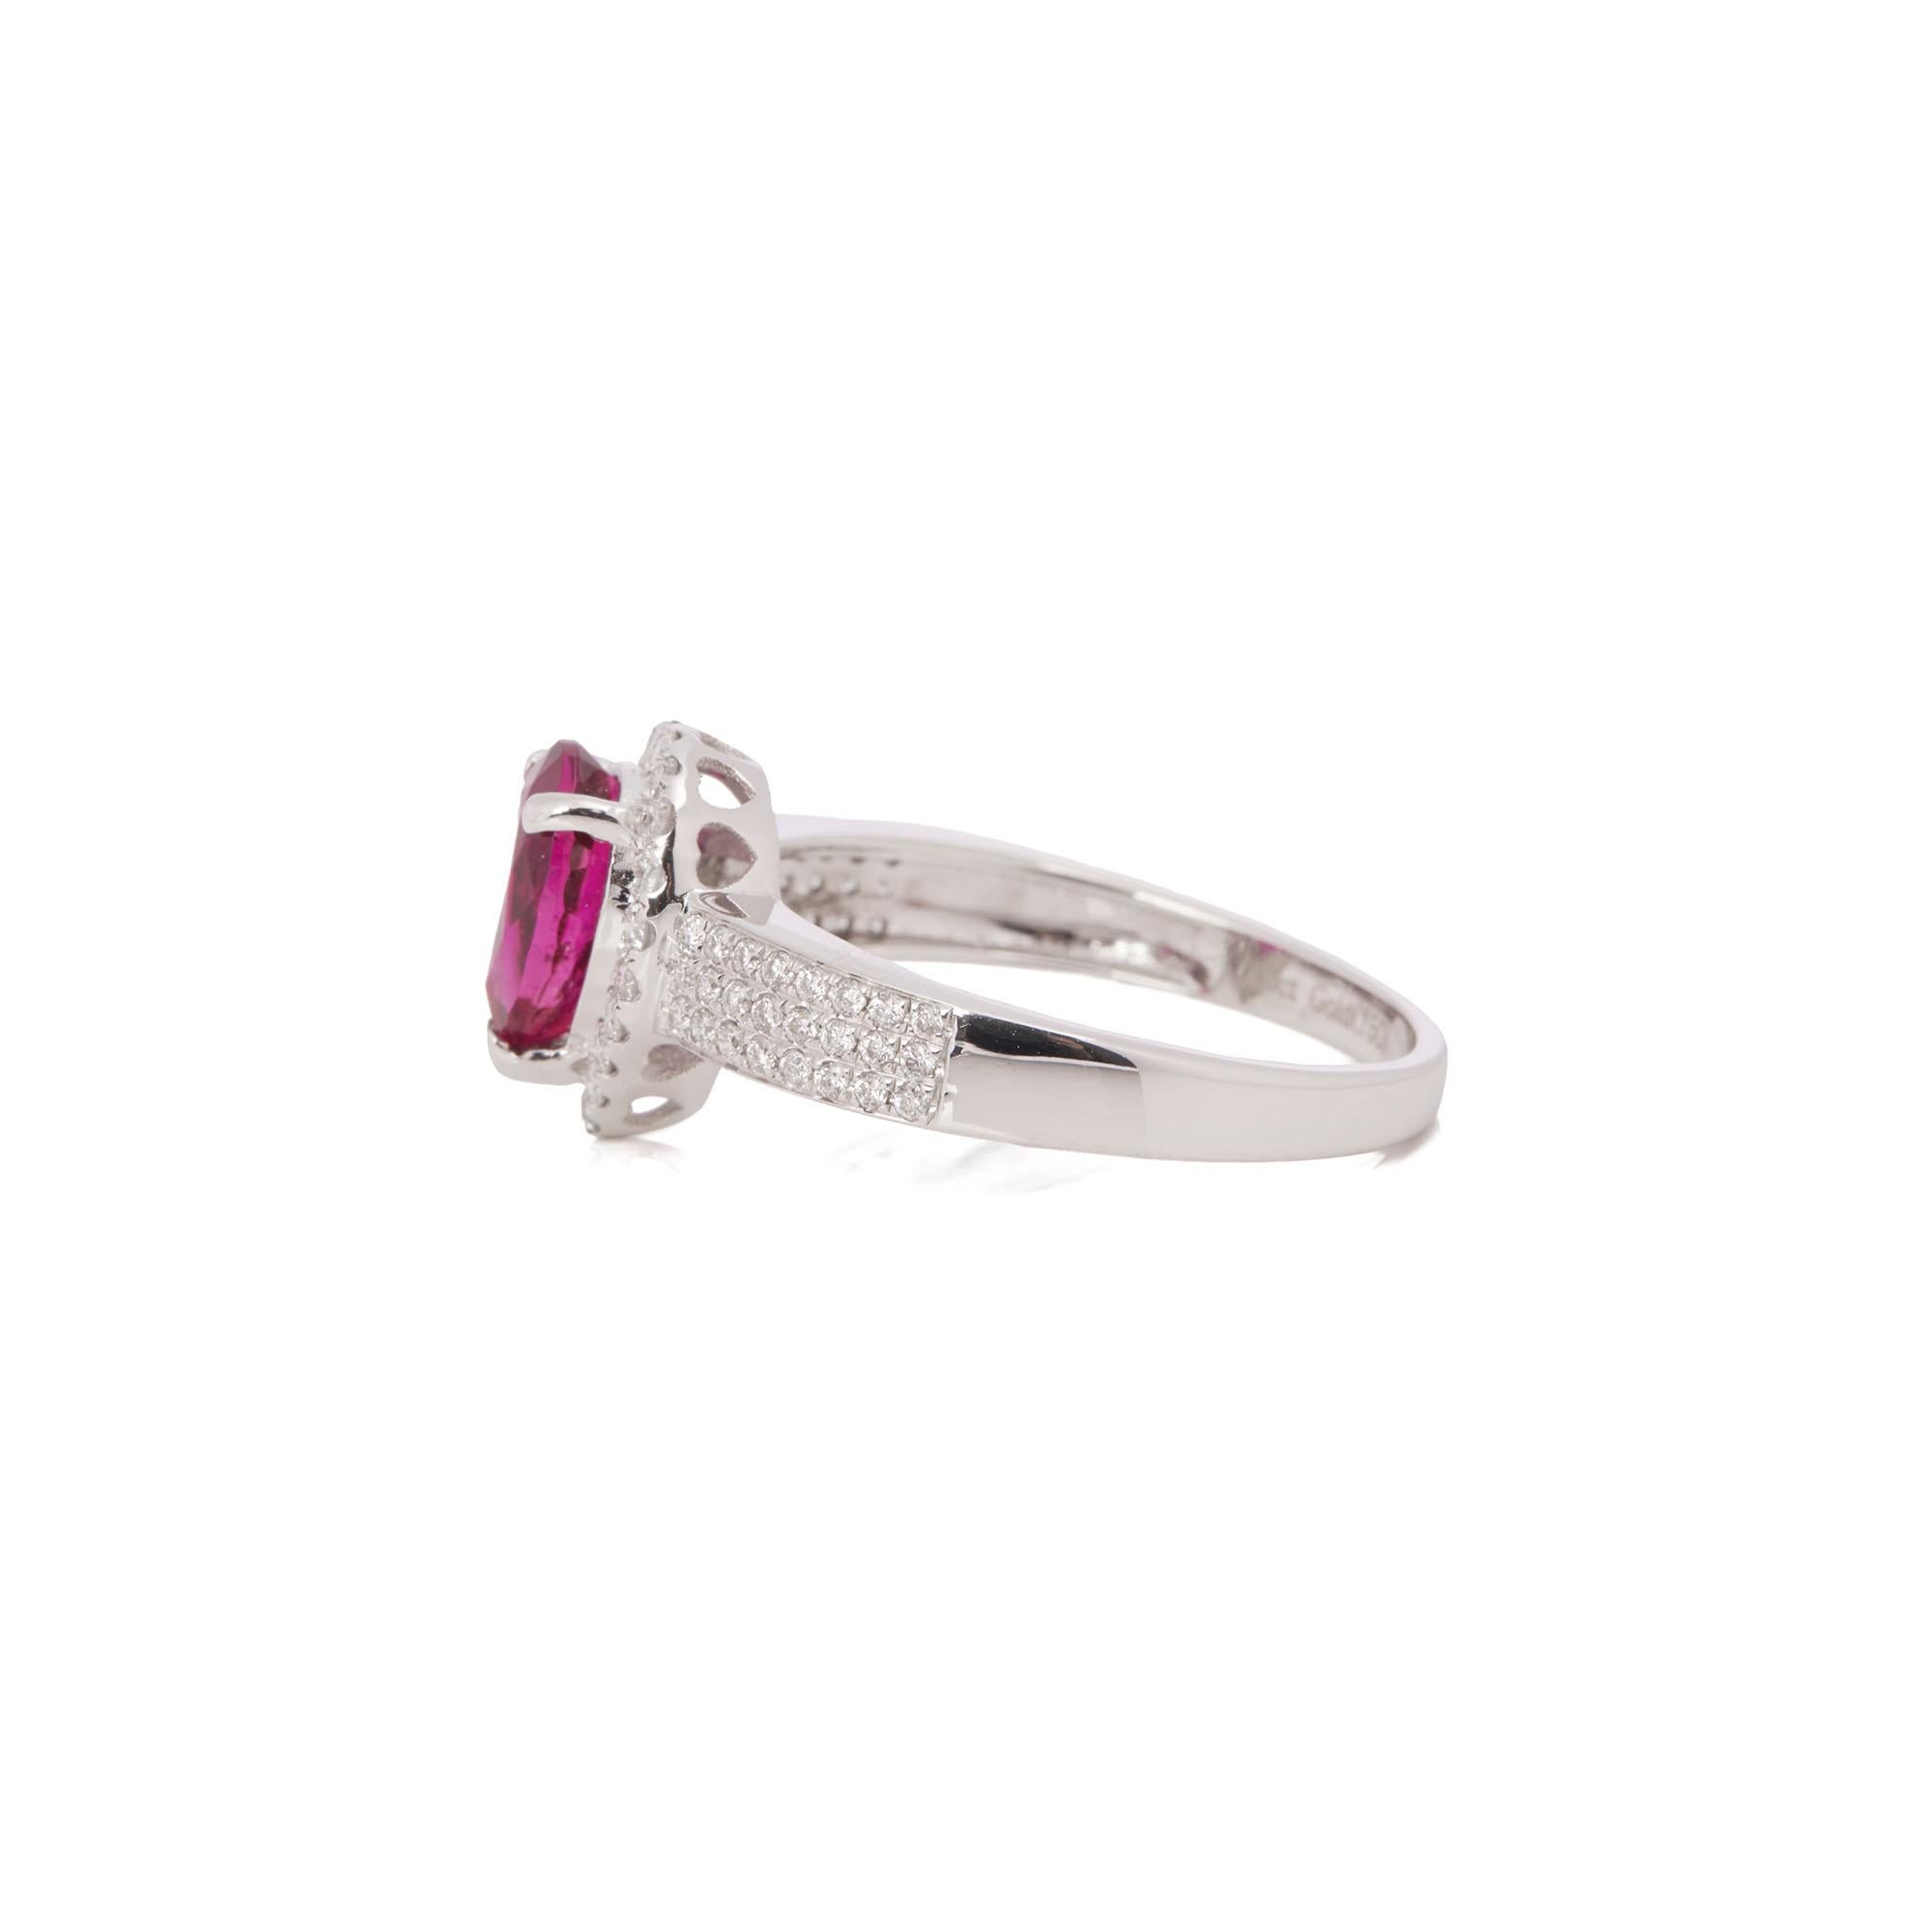 David Jerome Certified 1.23ct Pear Cut Rubellite and Diamond Ring In New Condition For Sale In Bishop's Stortford, Hertfordshire